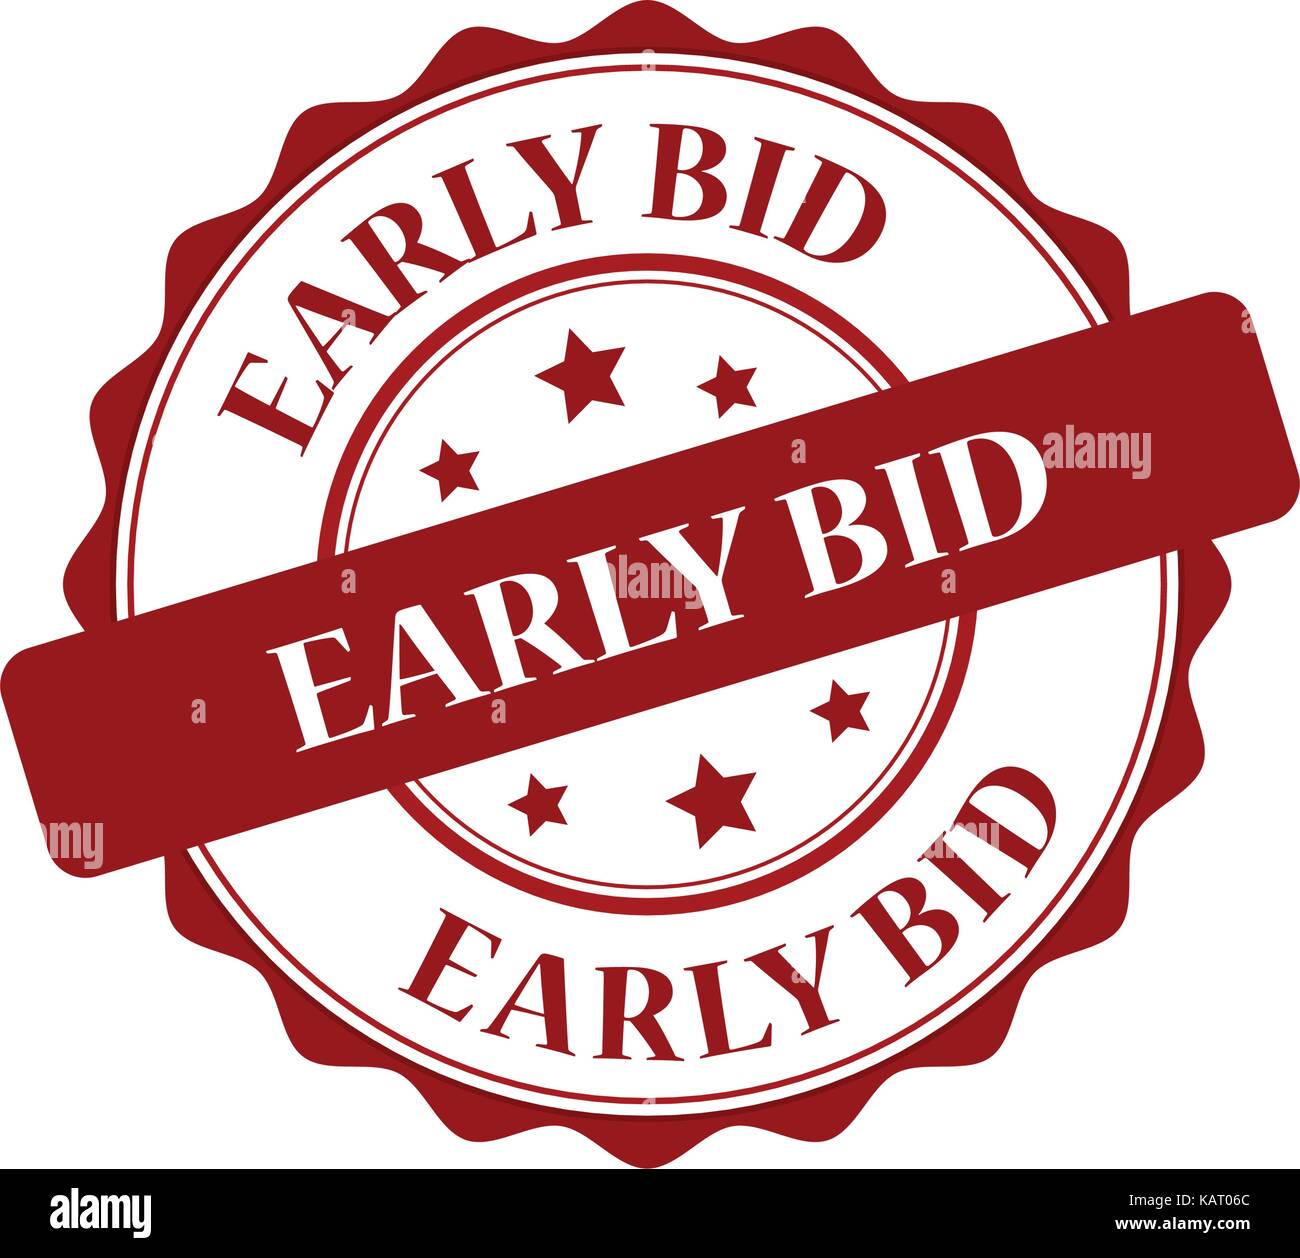 Early bid red stamp illustration Stock Vector